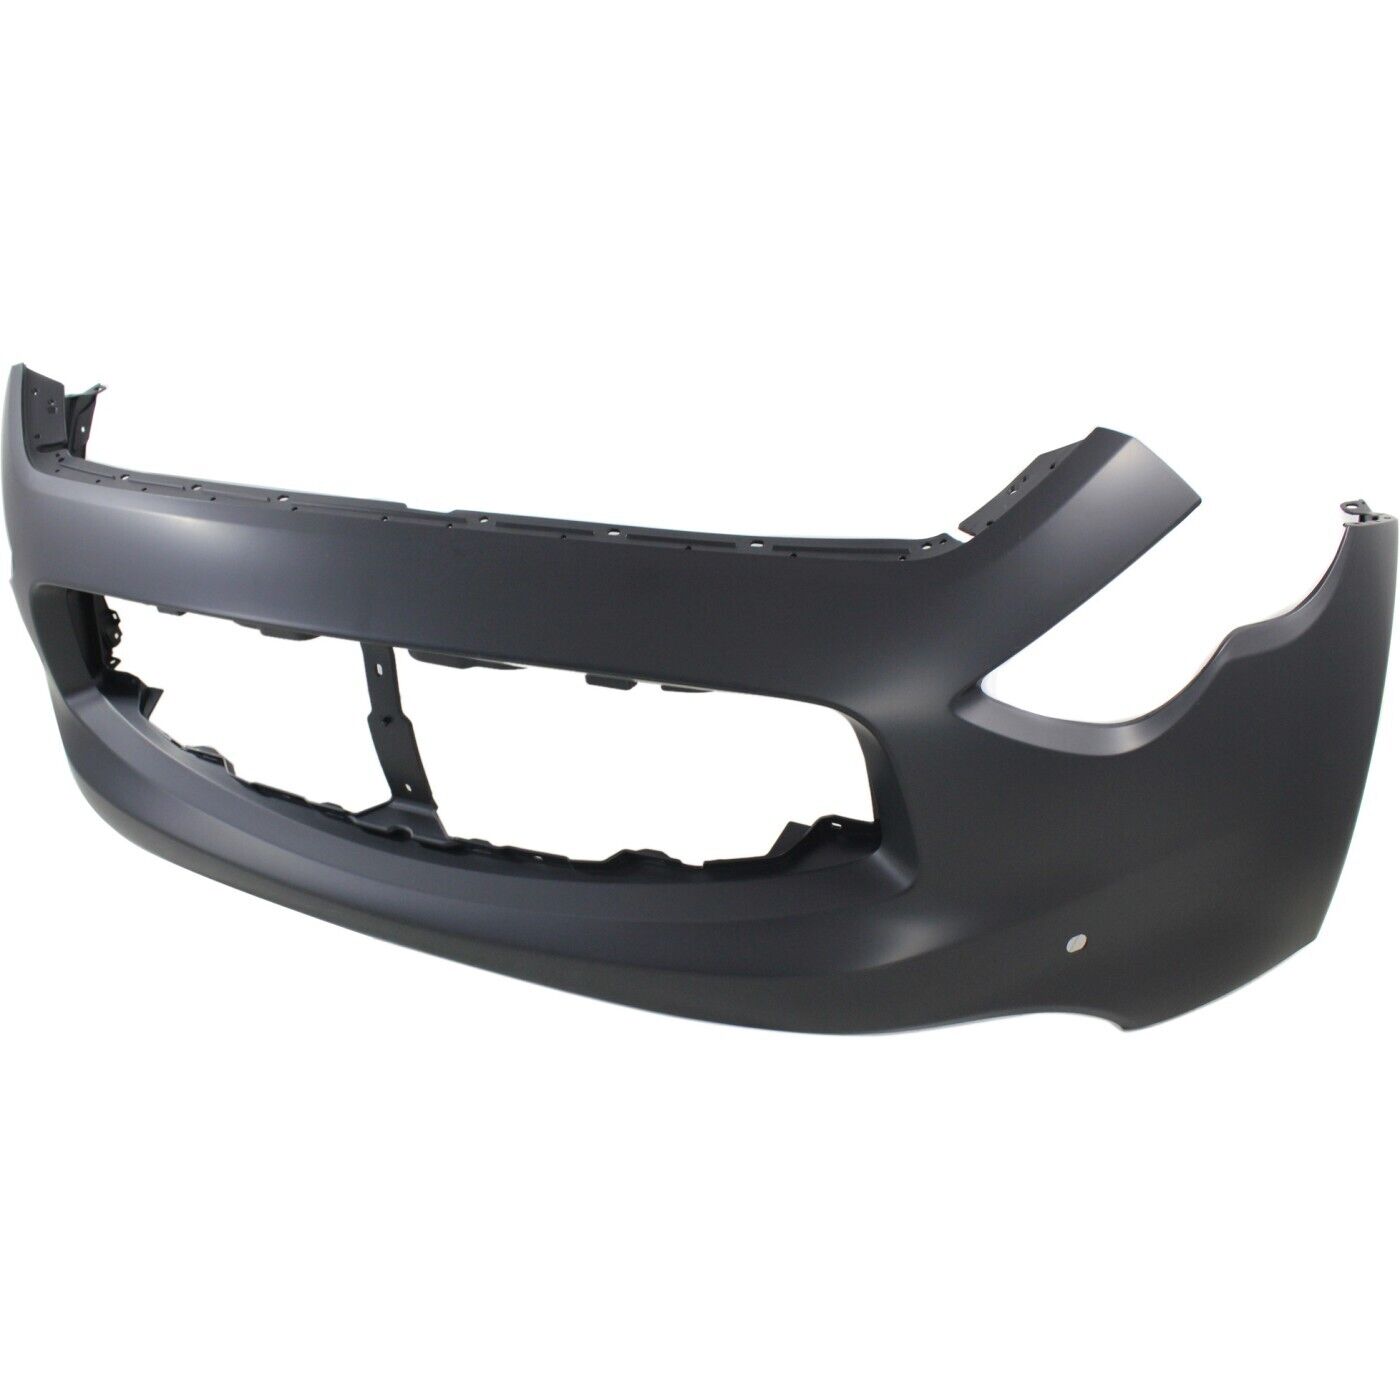 Front Bumper Cover Primed For 2009-2011 Infiniti FX35 with Navigation System